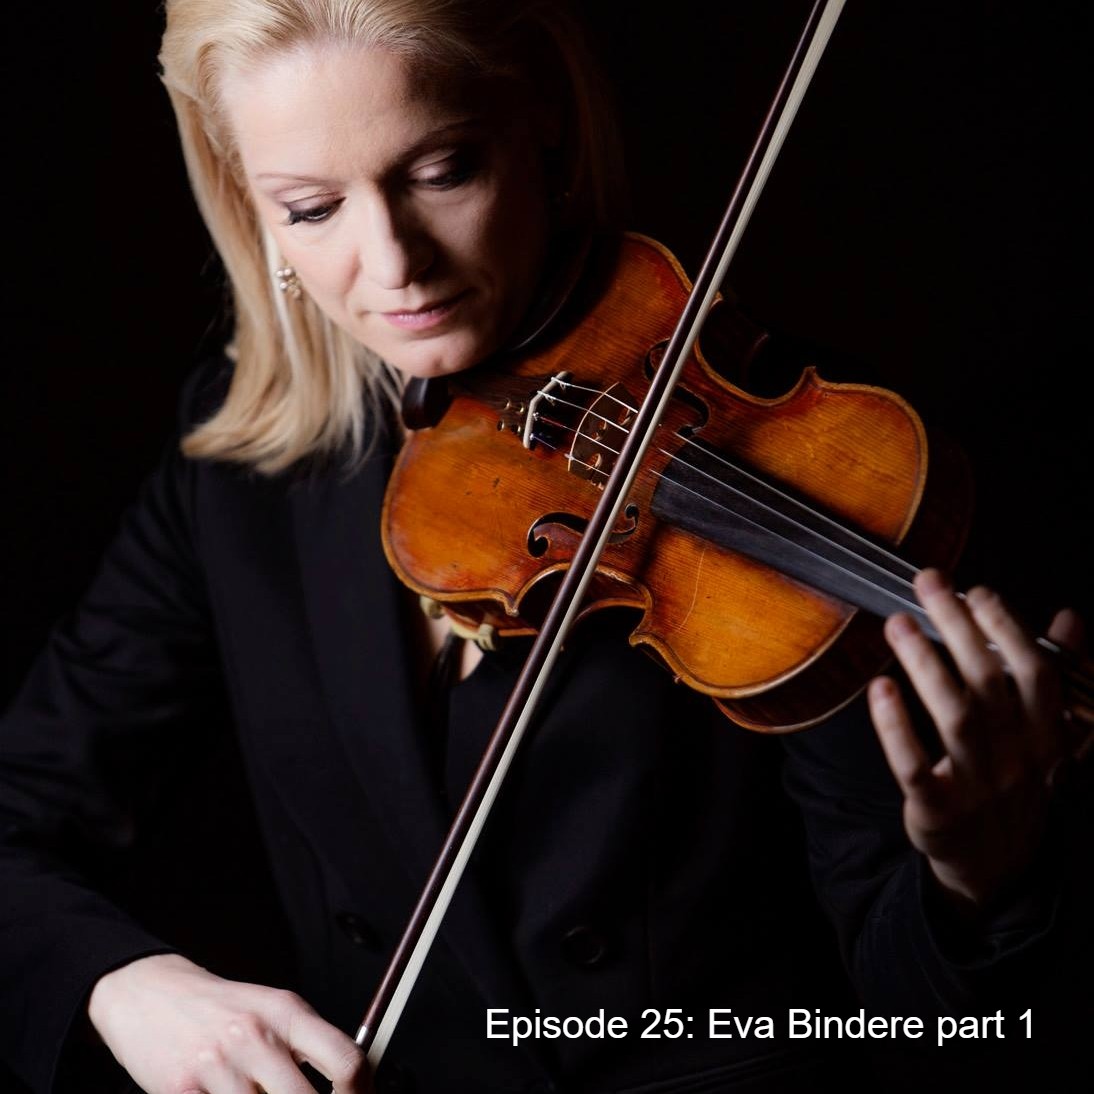 Episode 25: Eva Bindere (Is it possible to make a balance between work and life for musician? What the best practices to warm up?) - part 1